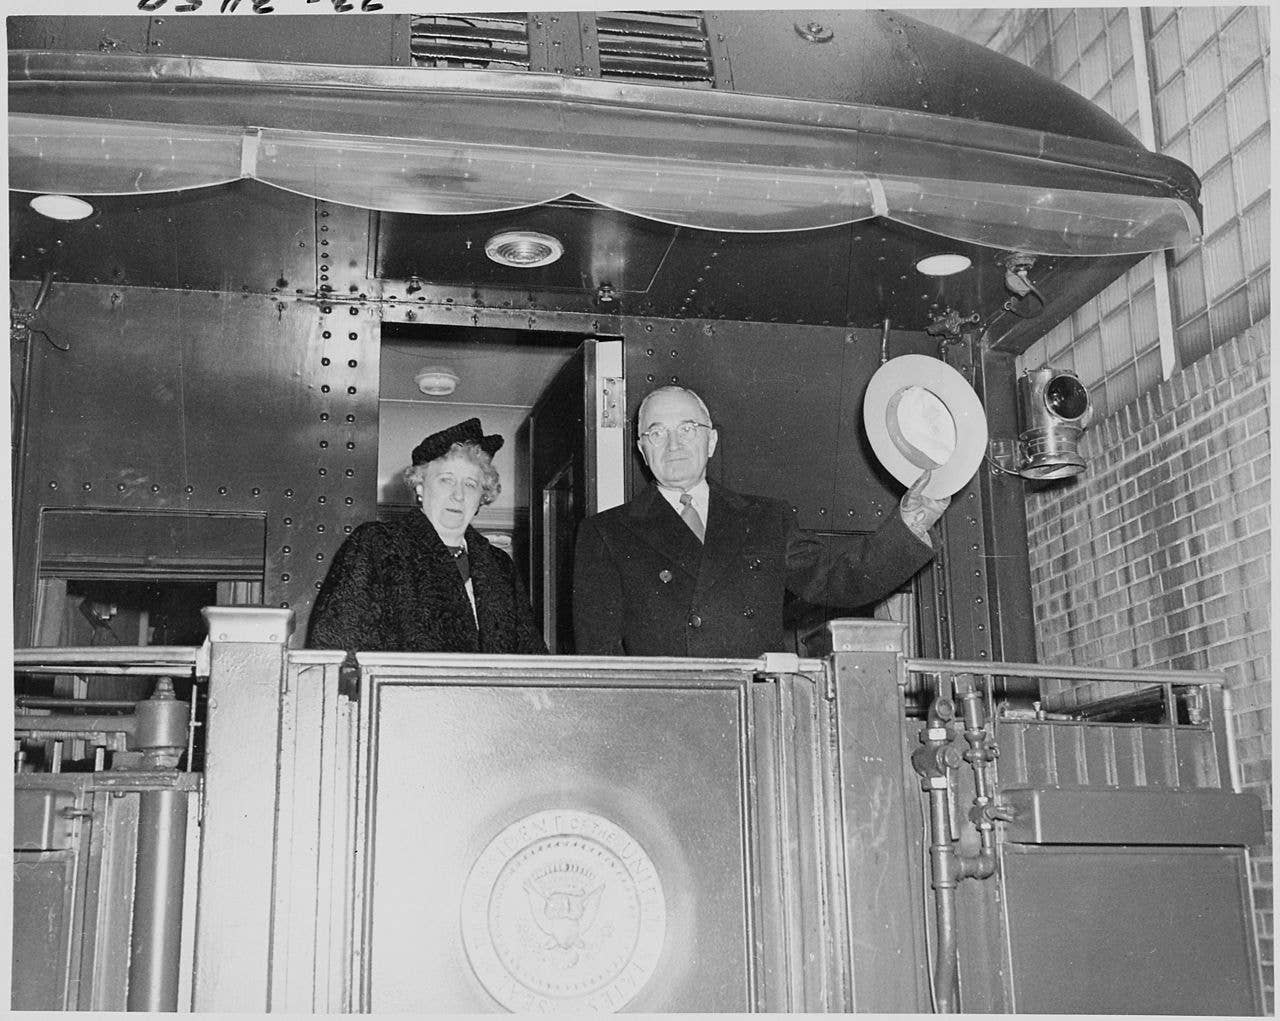 1280px-photograph_of_the_president_and_mrs._truman_on_the_rear_platform_of_the_presidents_railroad_car_the_-ferdinand._-_nara_-_200253.jpg